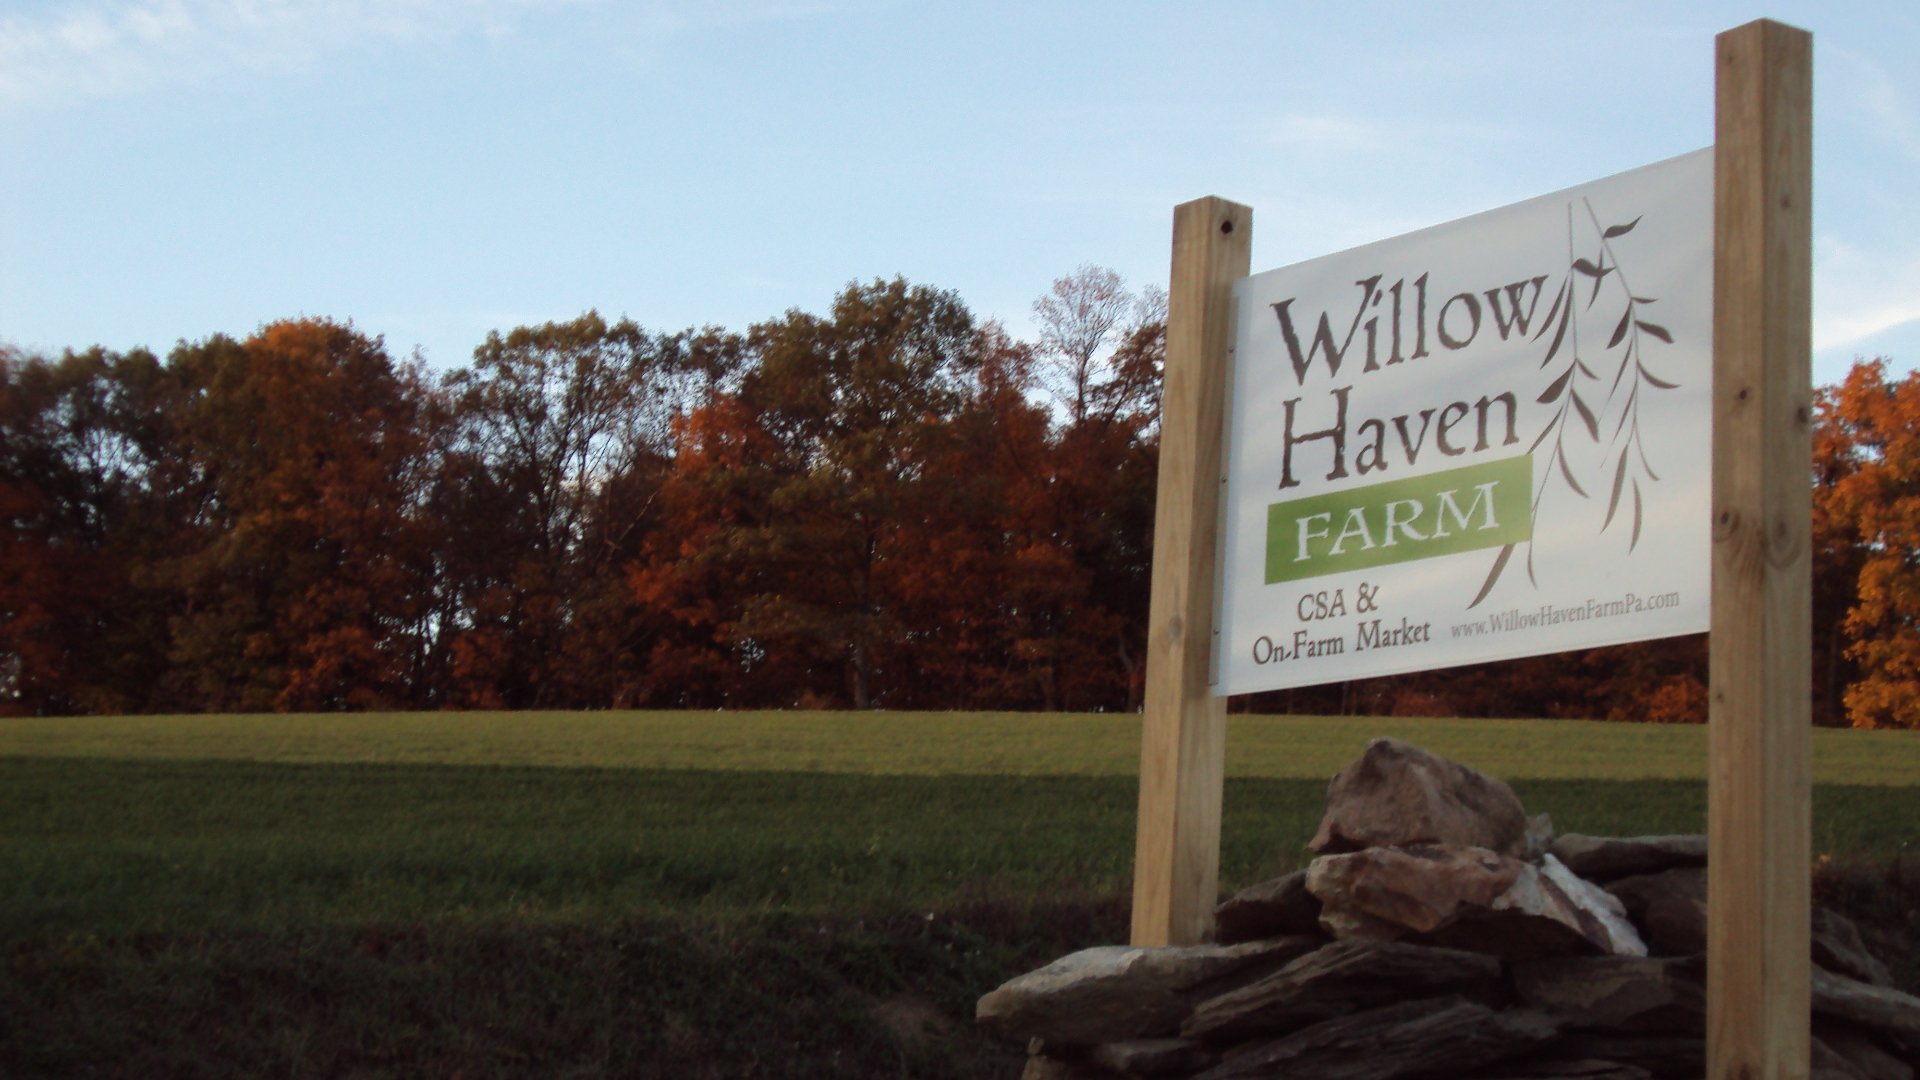 Previous Happening: Upcoming Farm Tours, fresh veggies available all Fall, sweet potato soup recipe & more